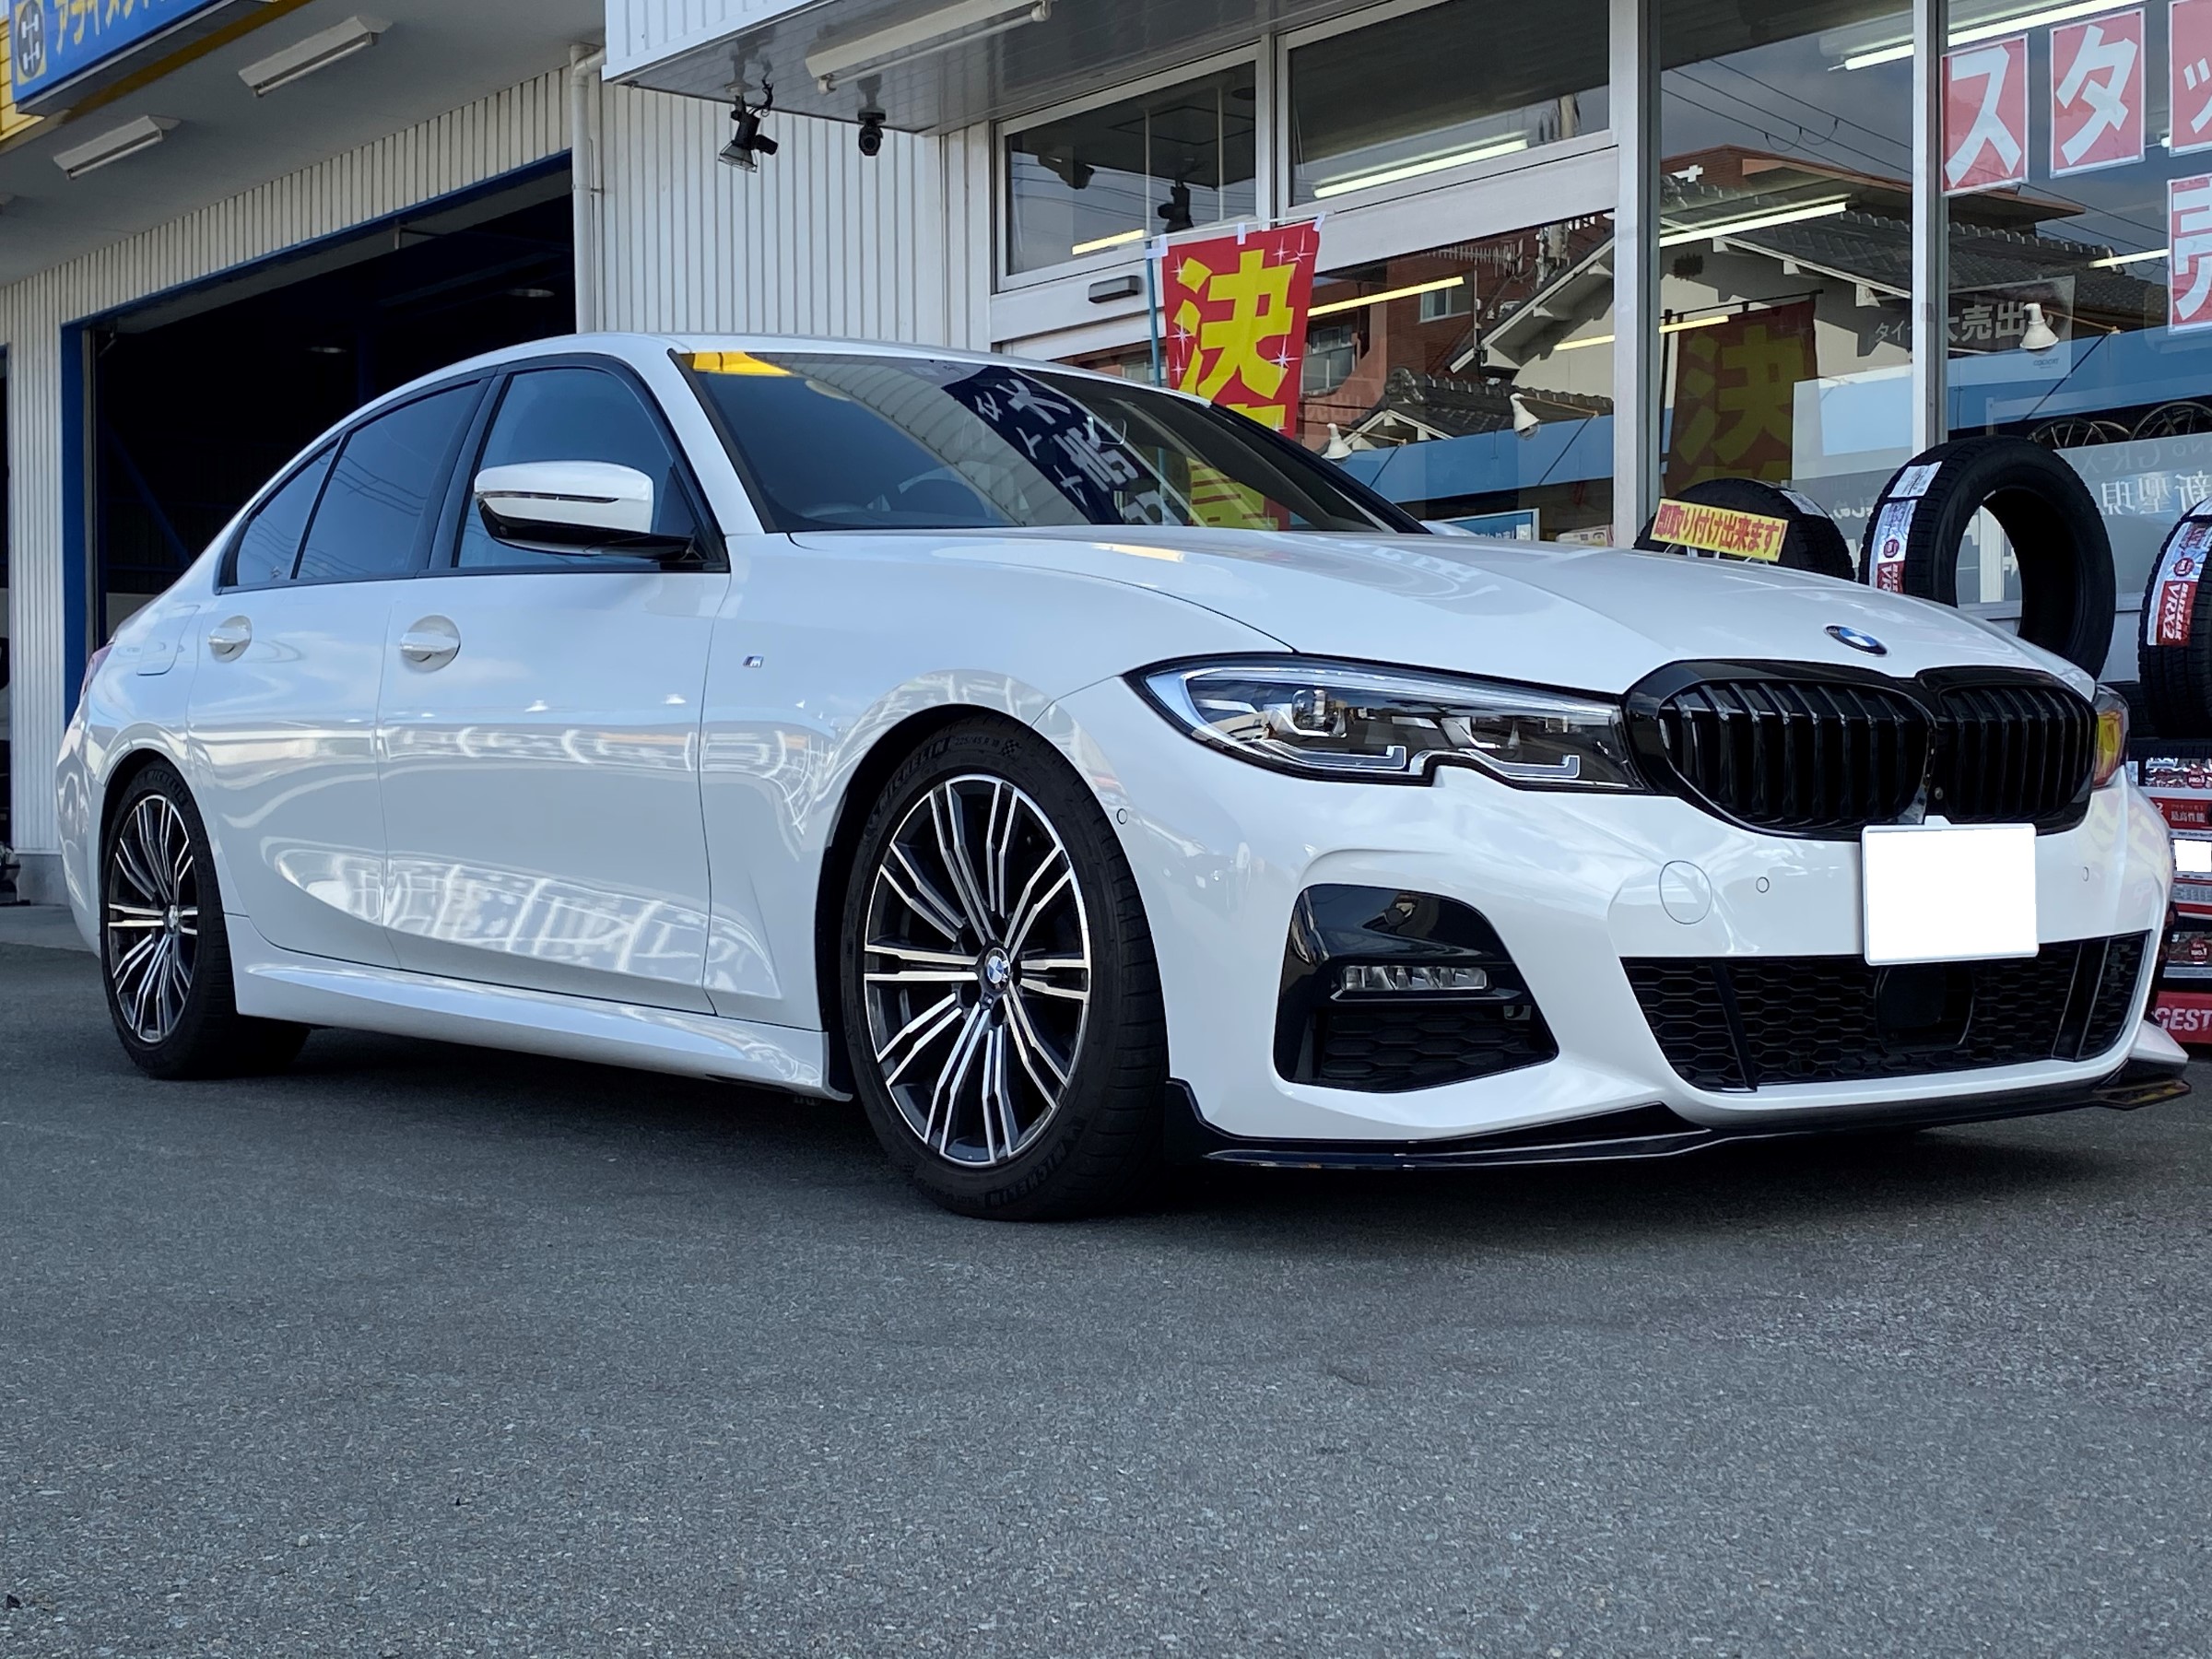 ☆ BMW New ３シリーズ G20 KW Ver.3 早速取り付けていきます 